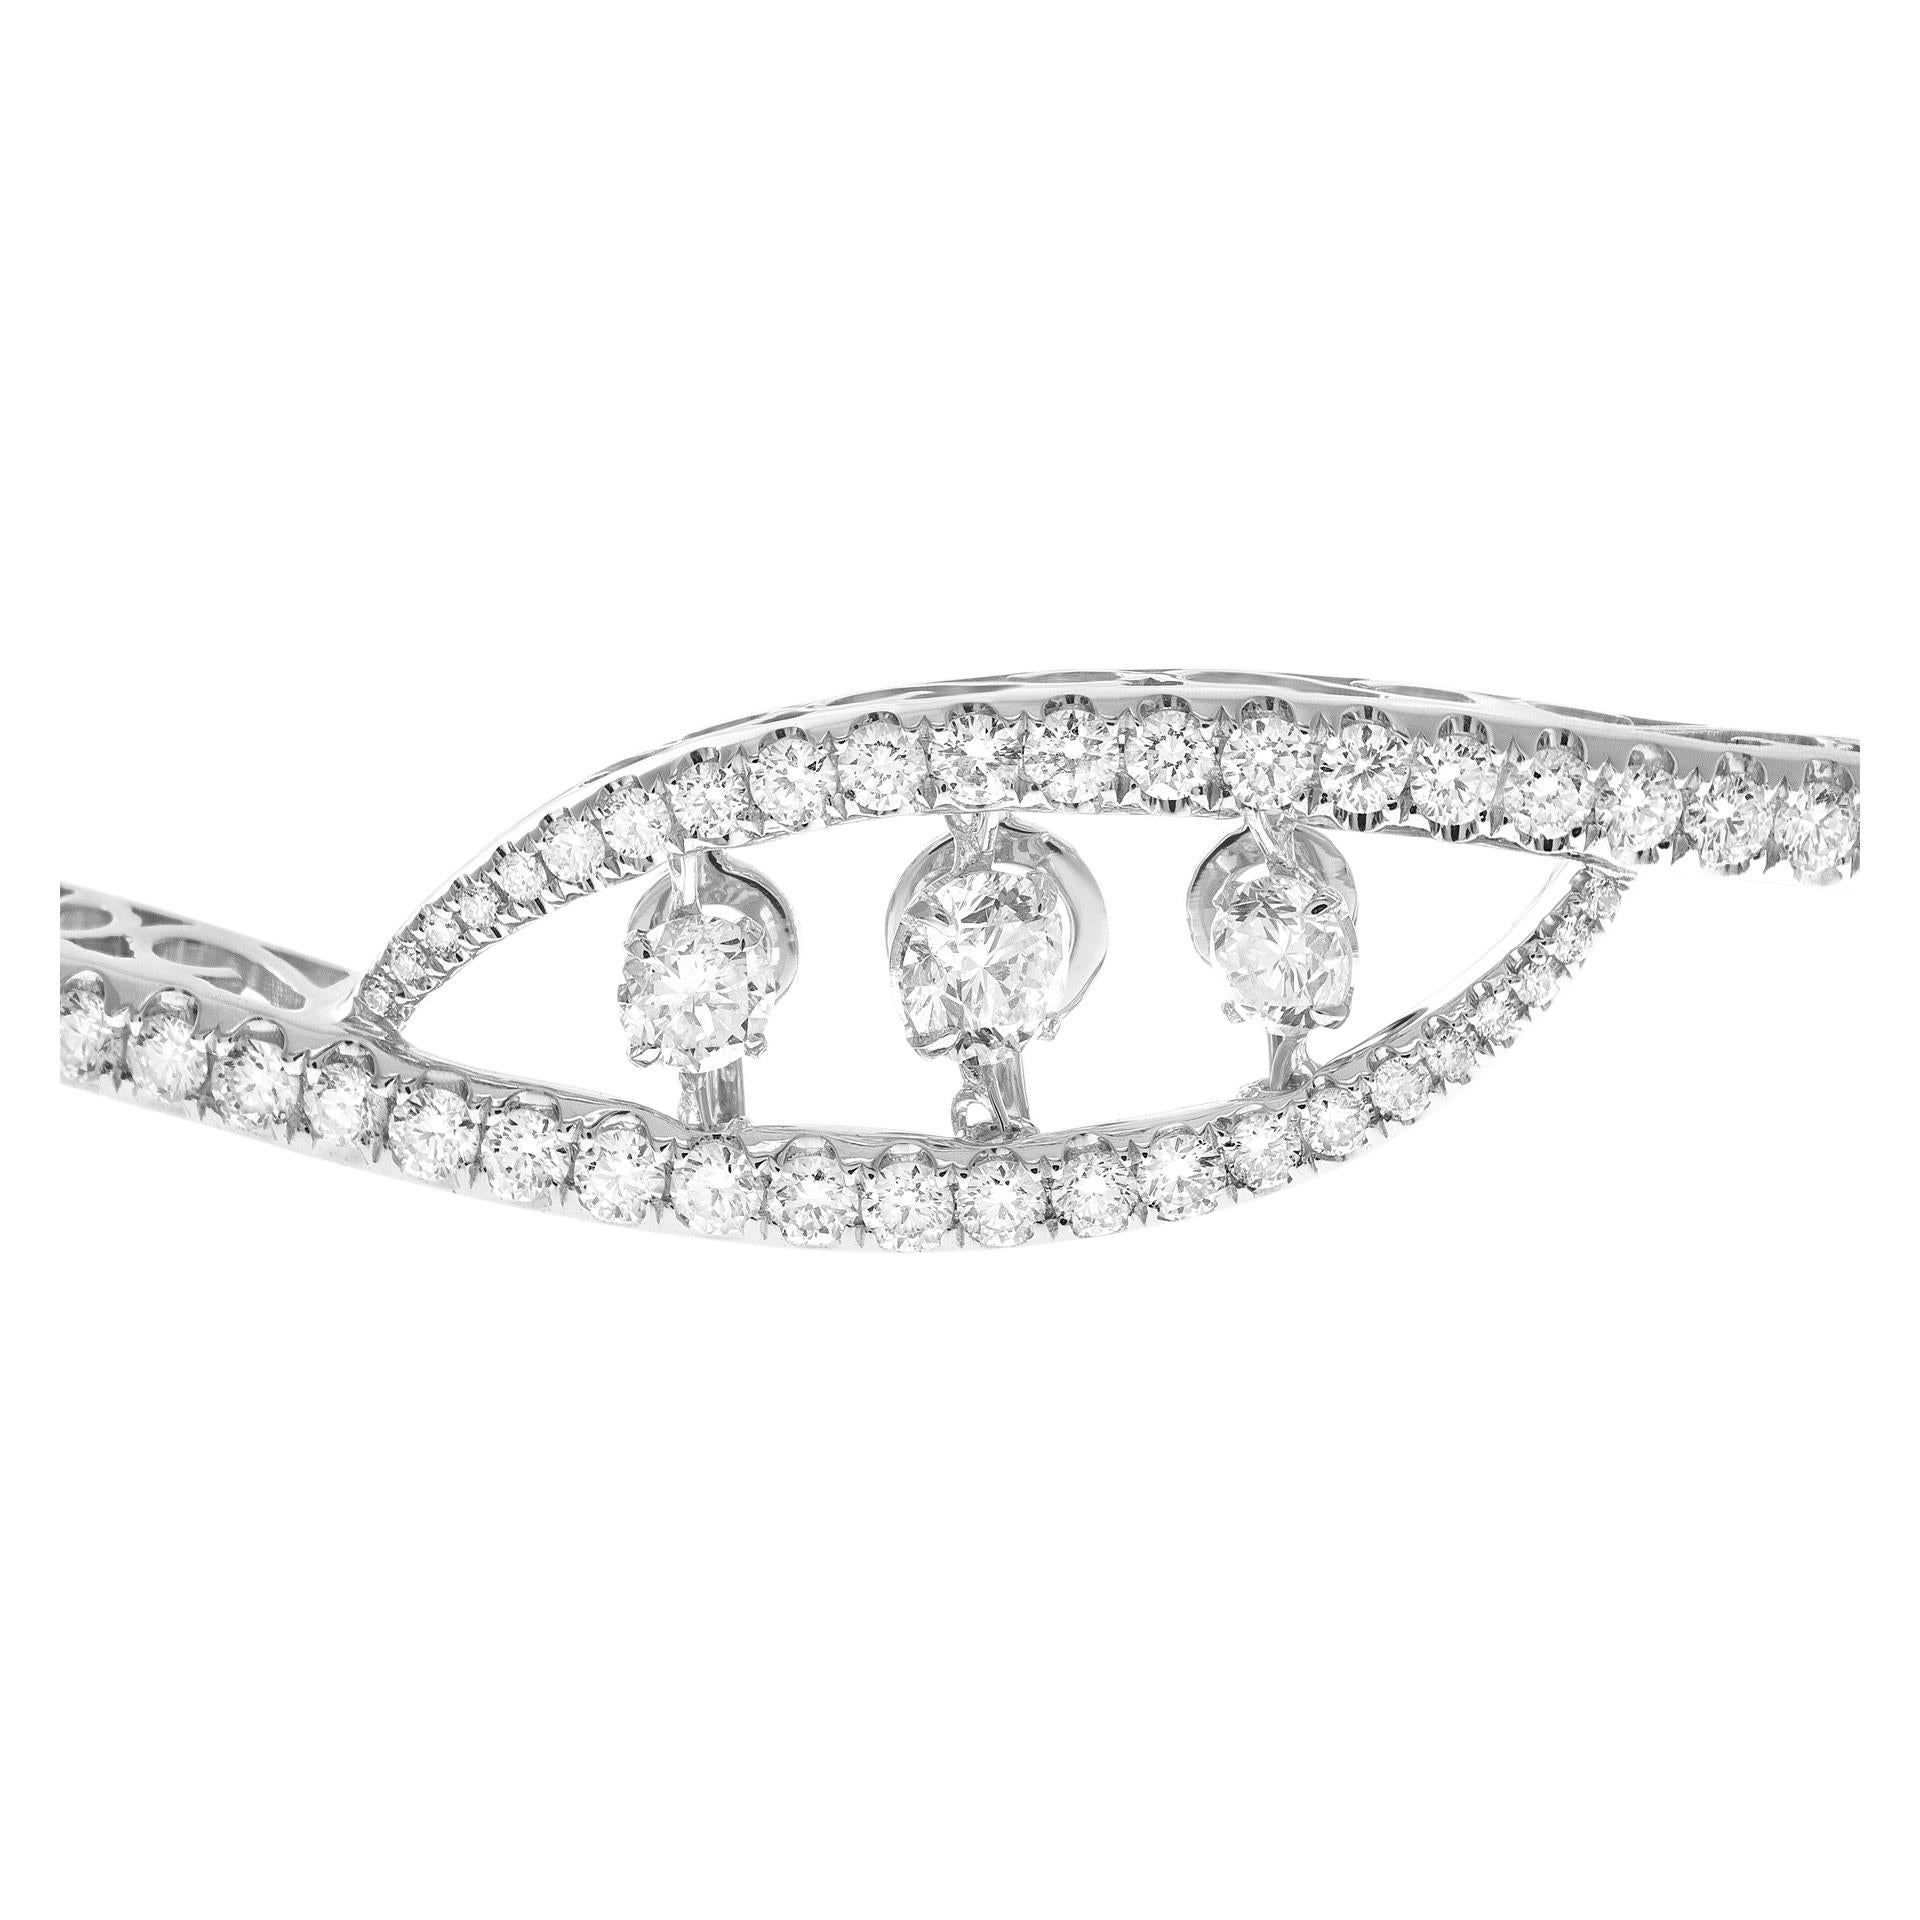 Stunning Diamond Eternity bangle in 18k white gold with center dancing diamonds 0.43 carats and with 2.71cts in diamonds all the way. Fits 6-7 inches.
